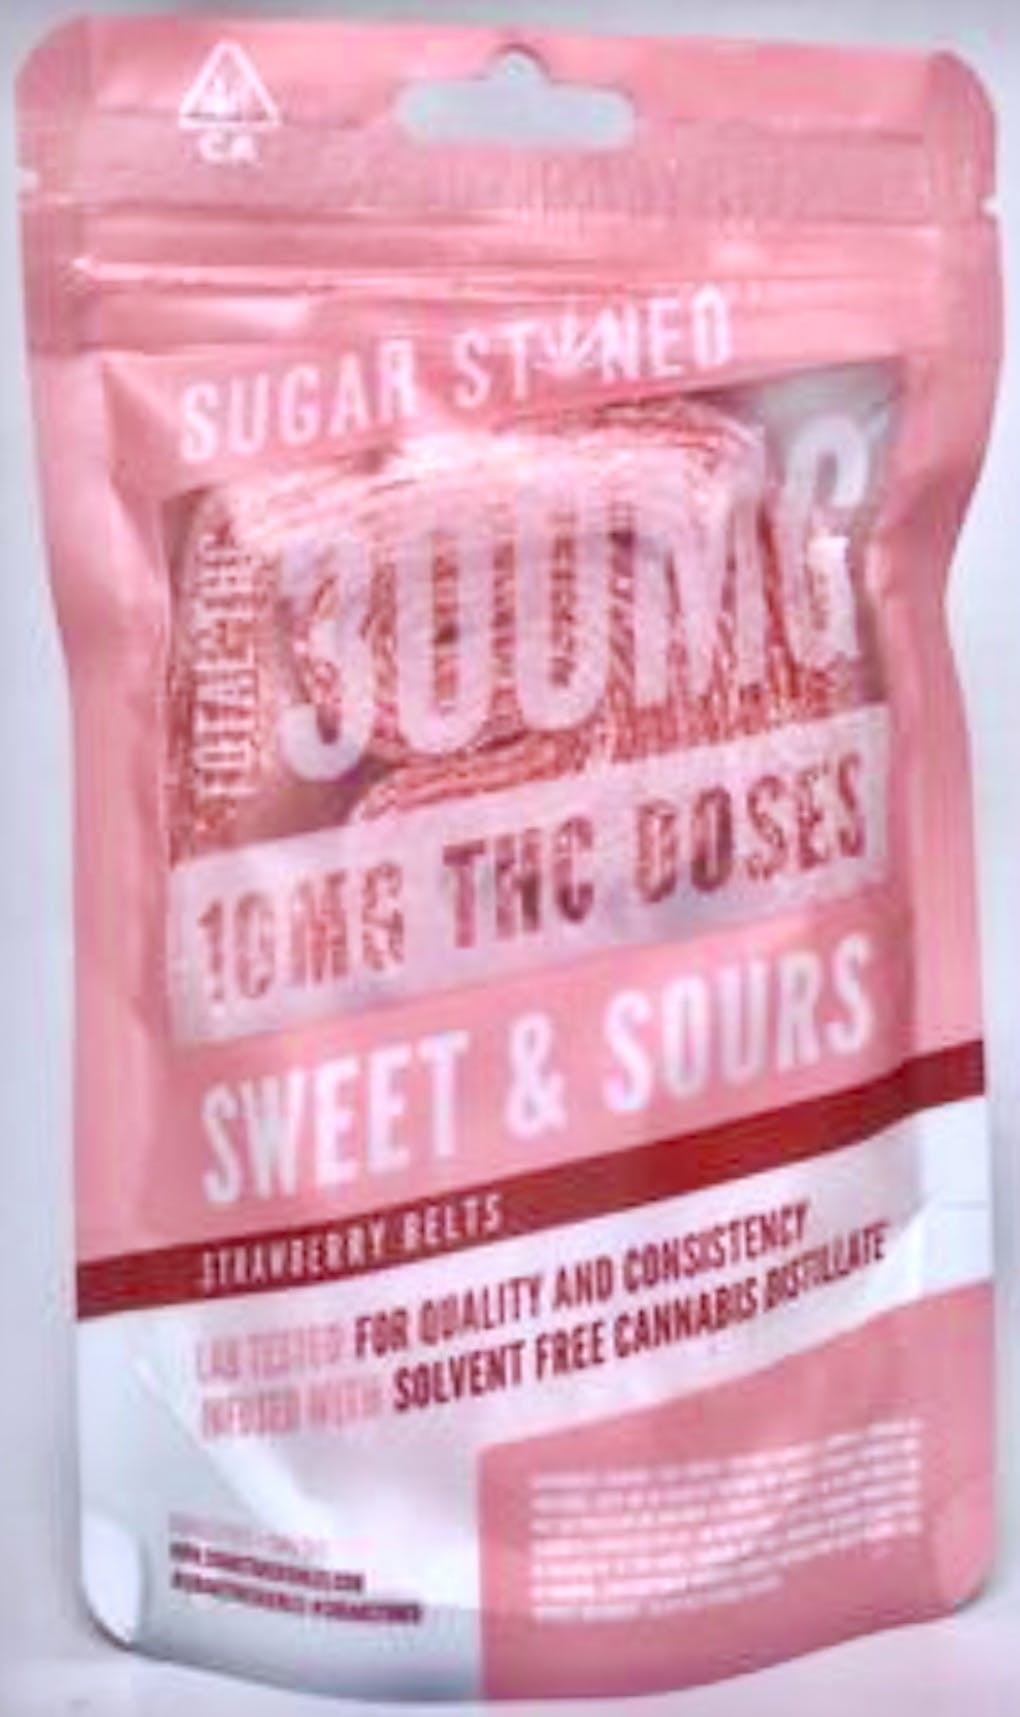 edible-sugar-stoned-sour-belts-strawberry-300mg